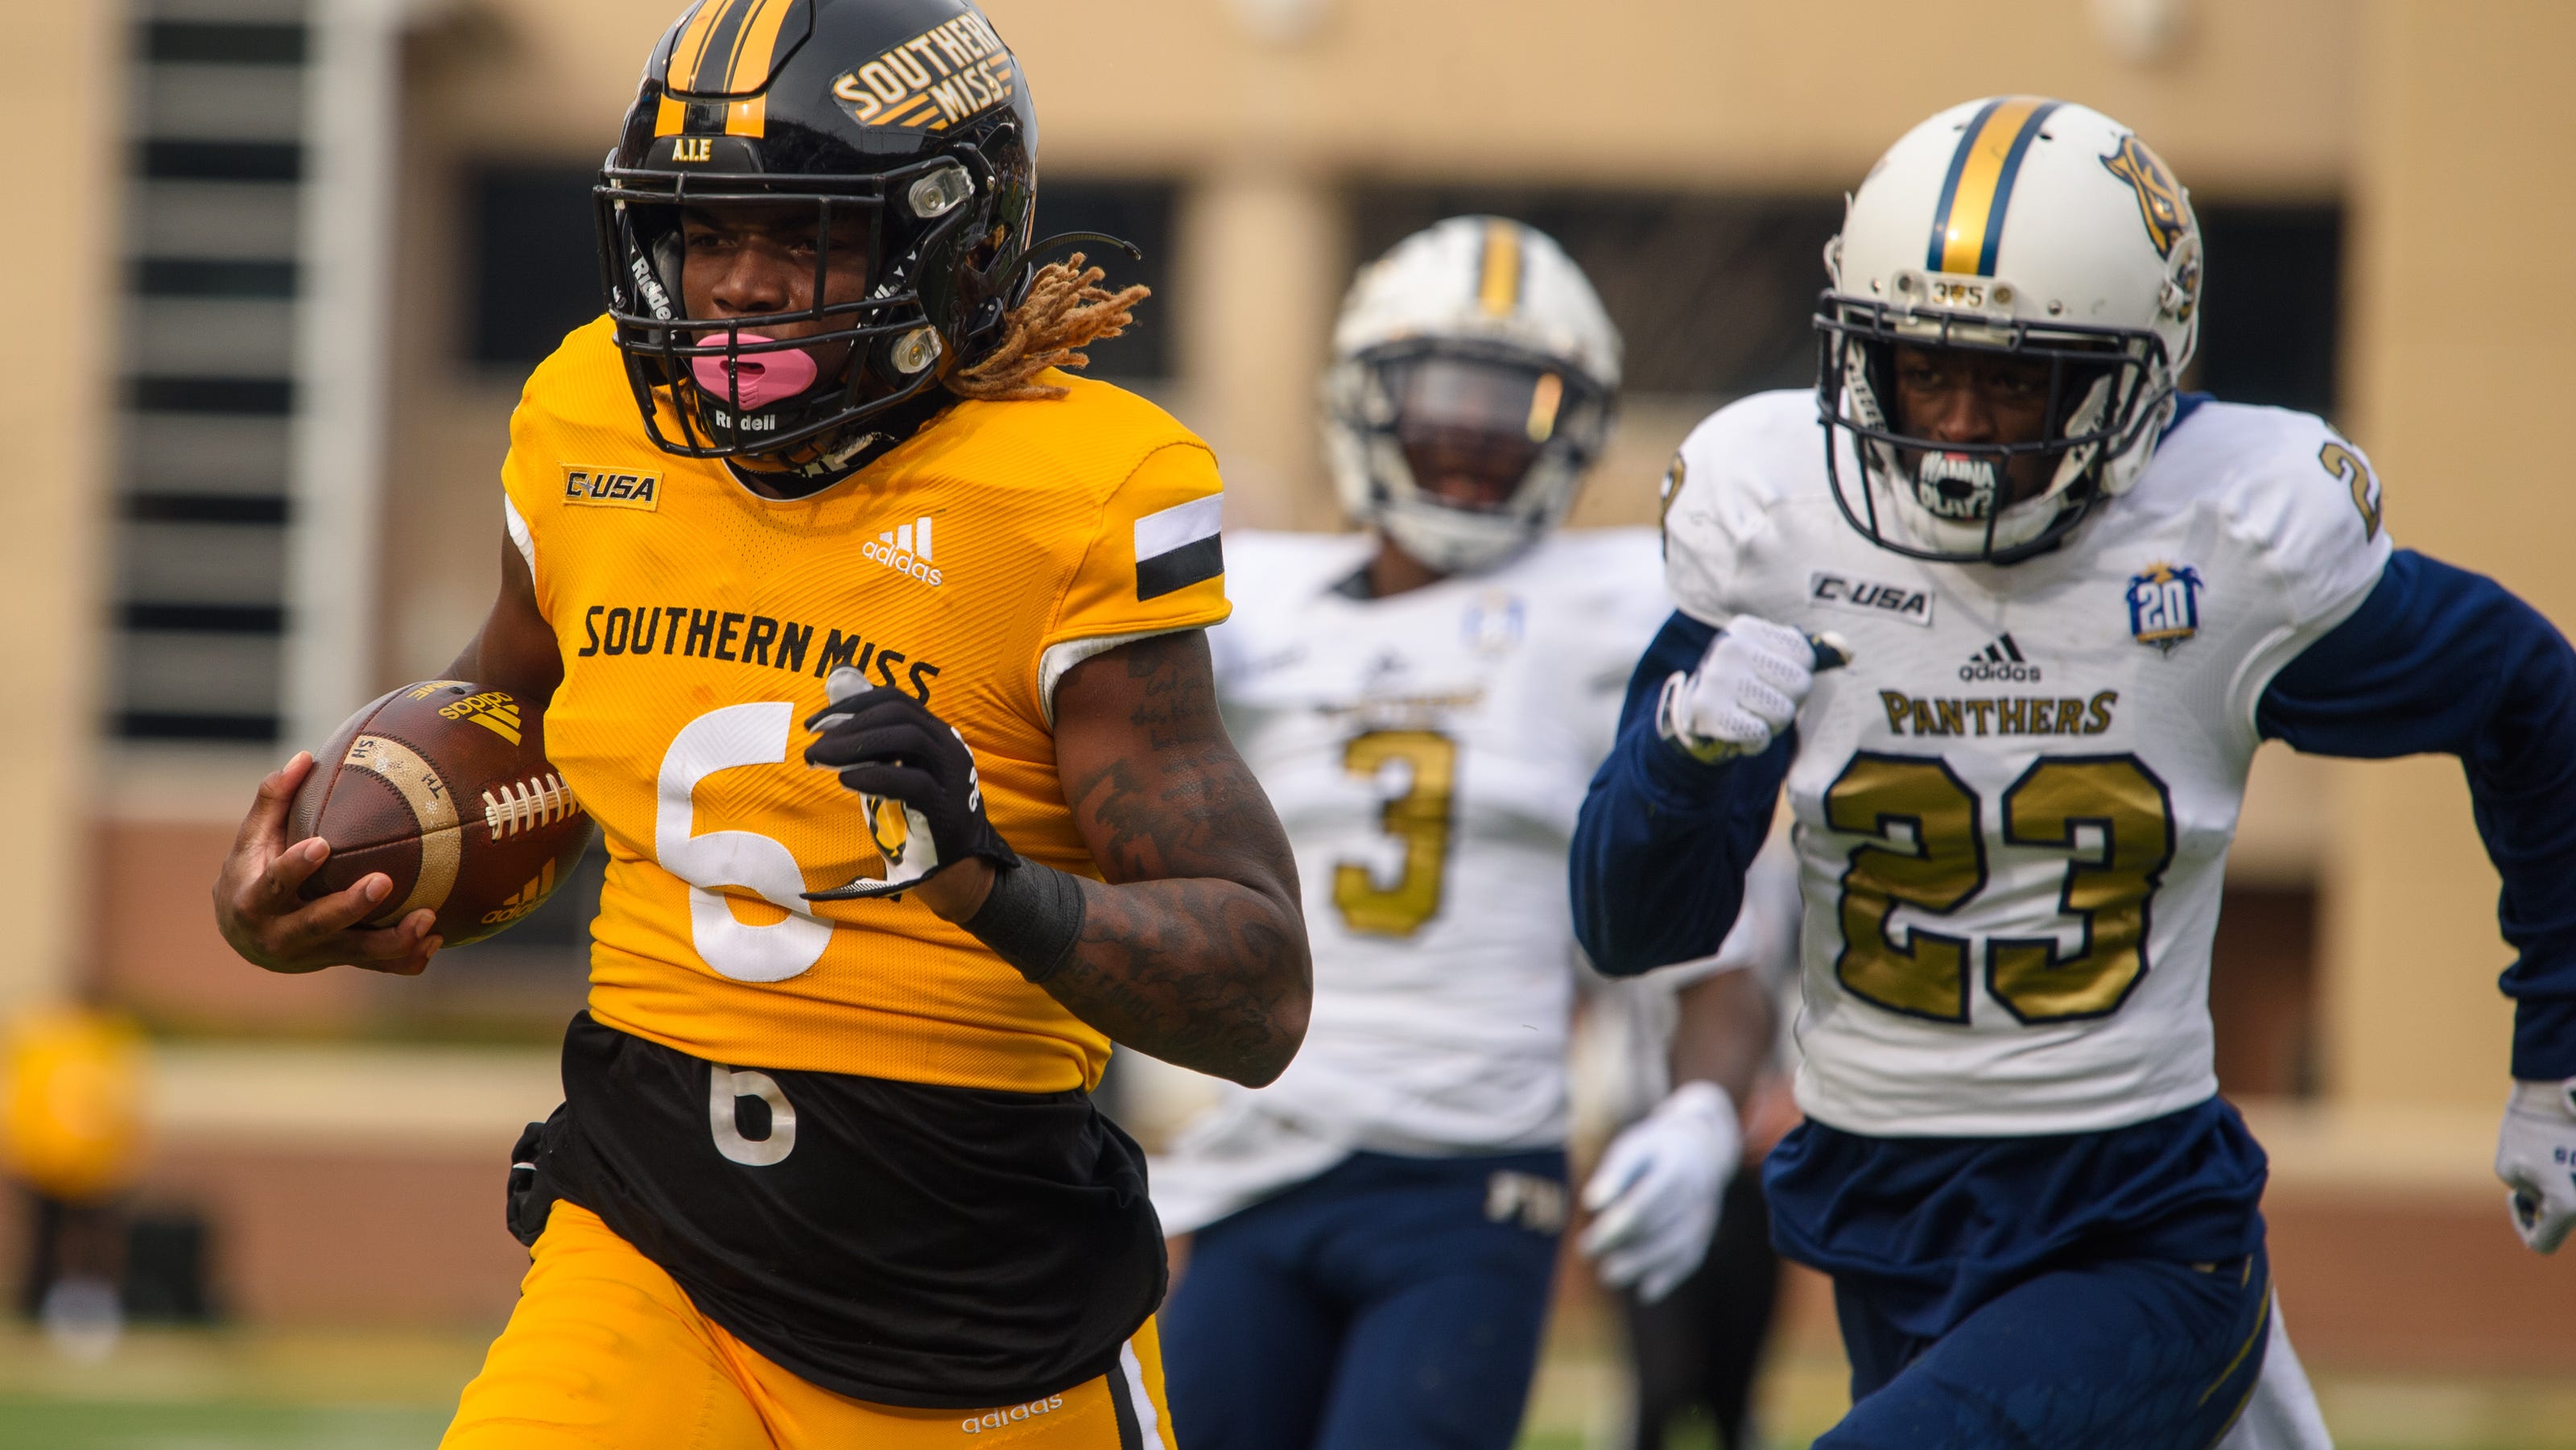 Southern Miss football schedule released with Sun Belt opponents